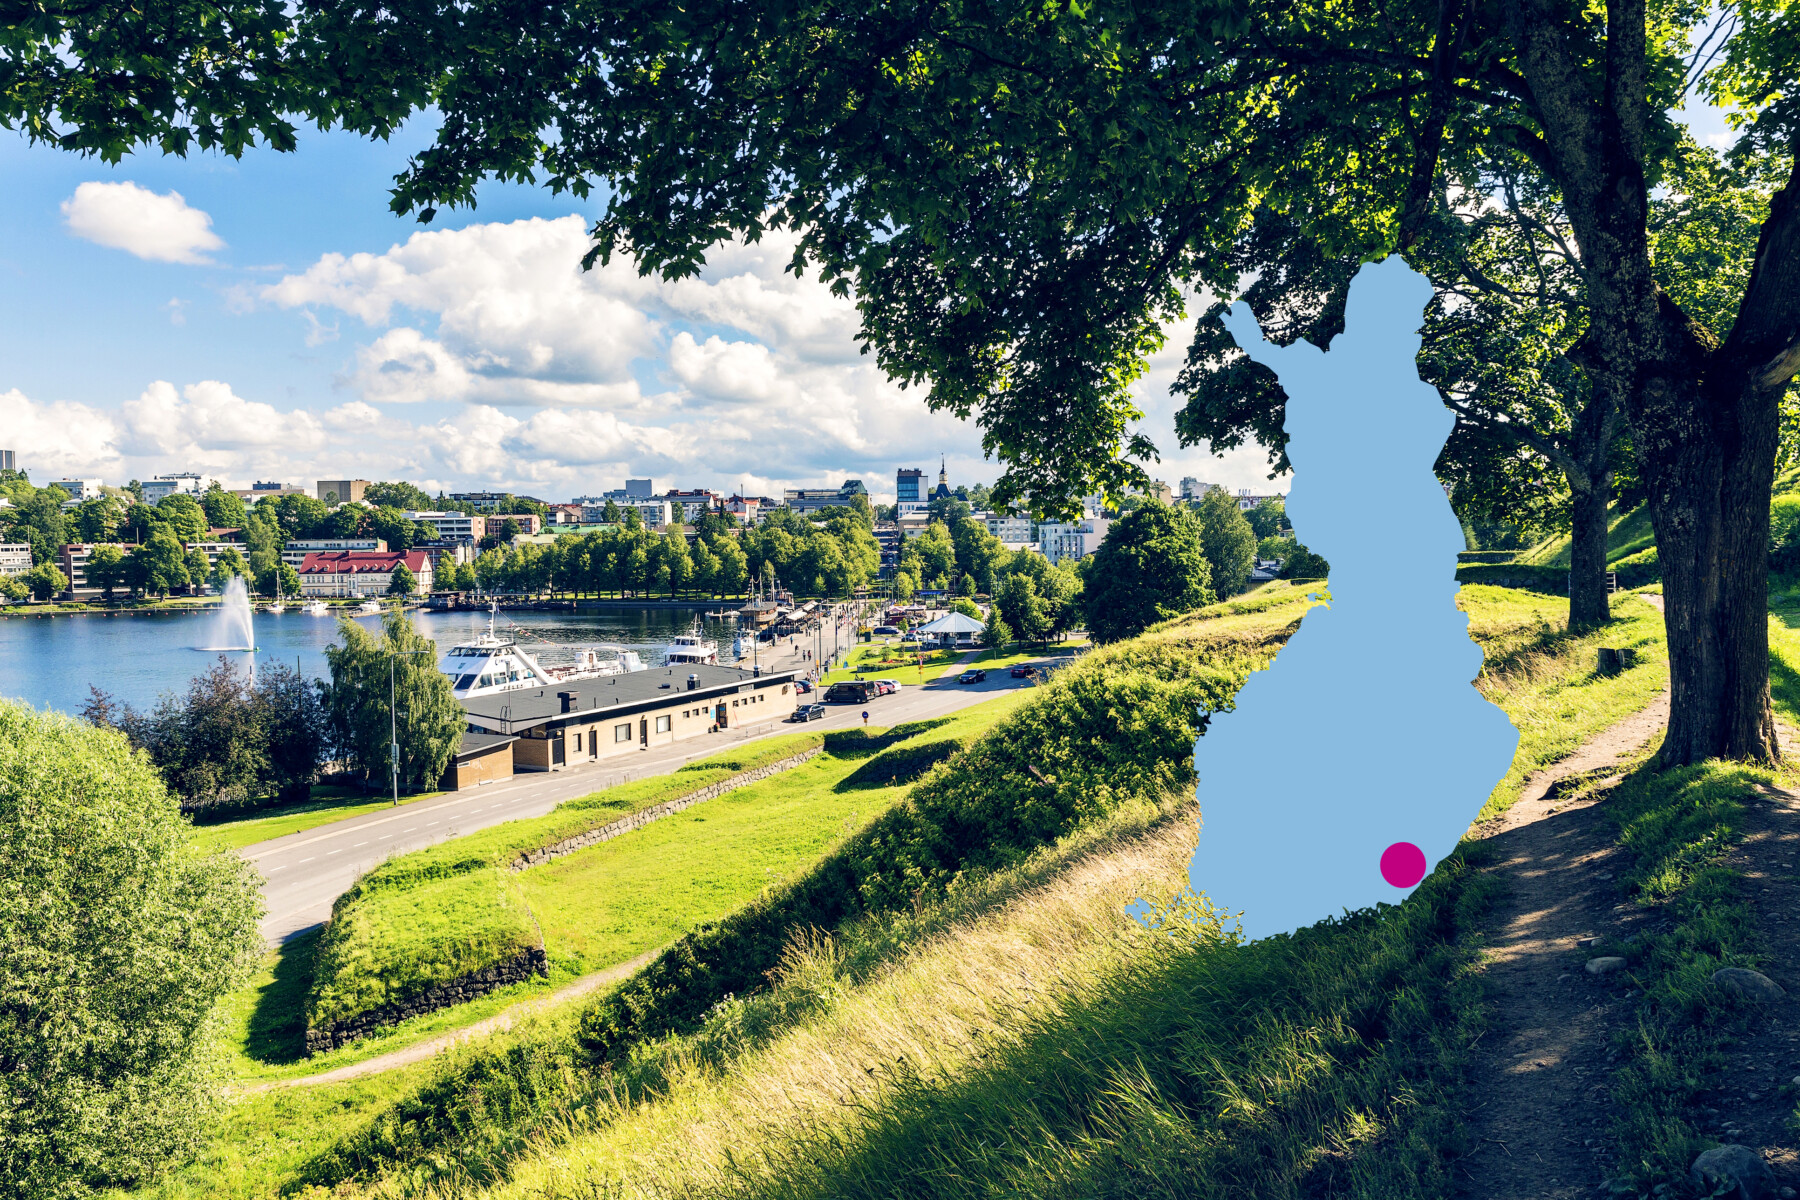 Buildings and a harbour are shown in a view from a green hill in a park in Lappeenranta, a city in southeastern Finland on the shore of Lake Saimaa.